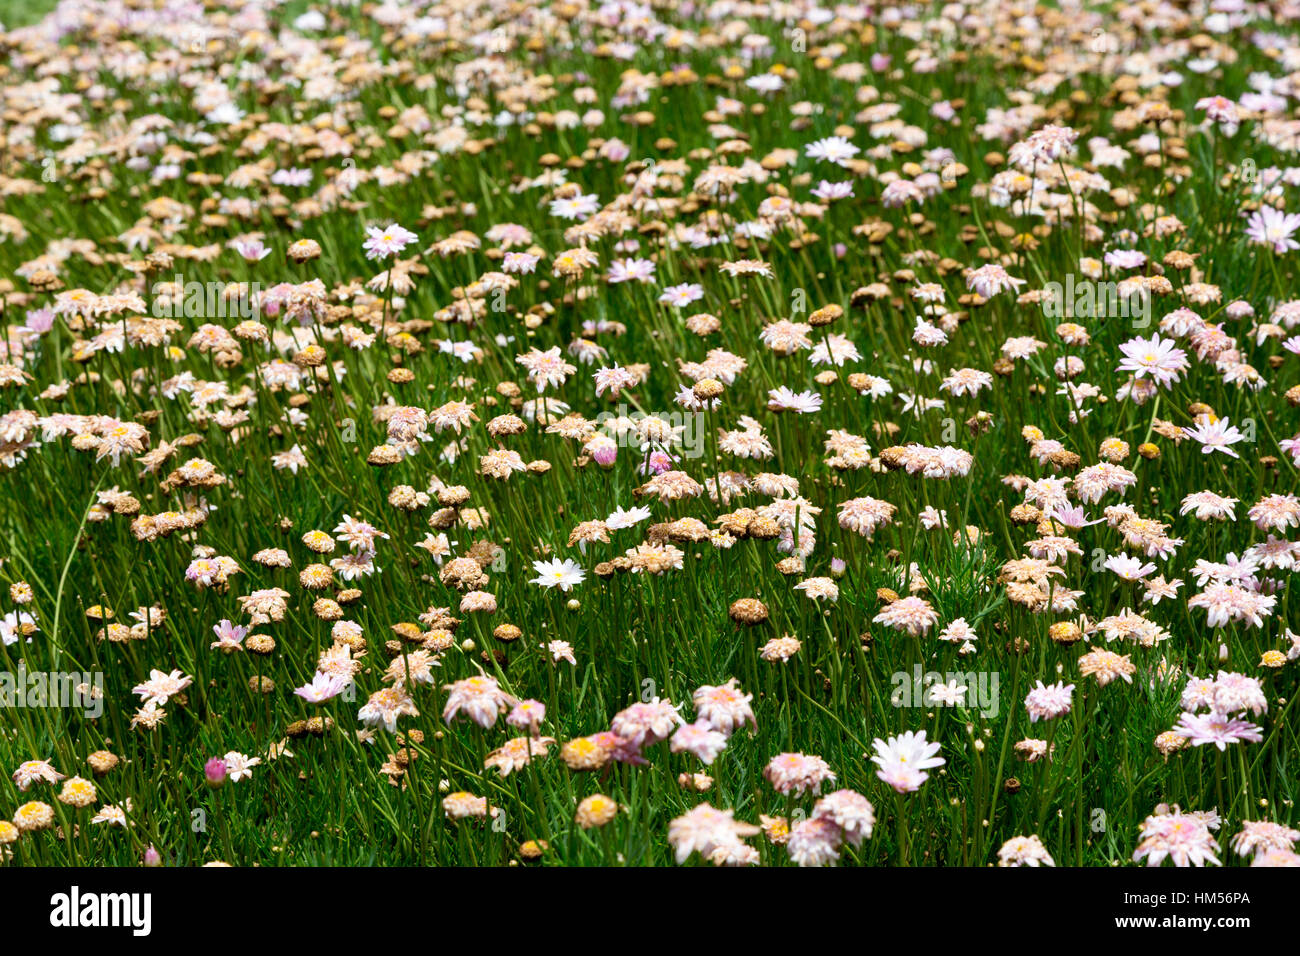 Withering daisy 'Petite Pink' (Argyranthemum sp.), full of flowers in garden, Campos do Jordao, State of Sao Paulo, Brazil Stock Photo